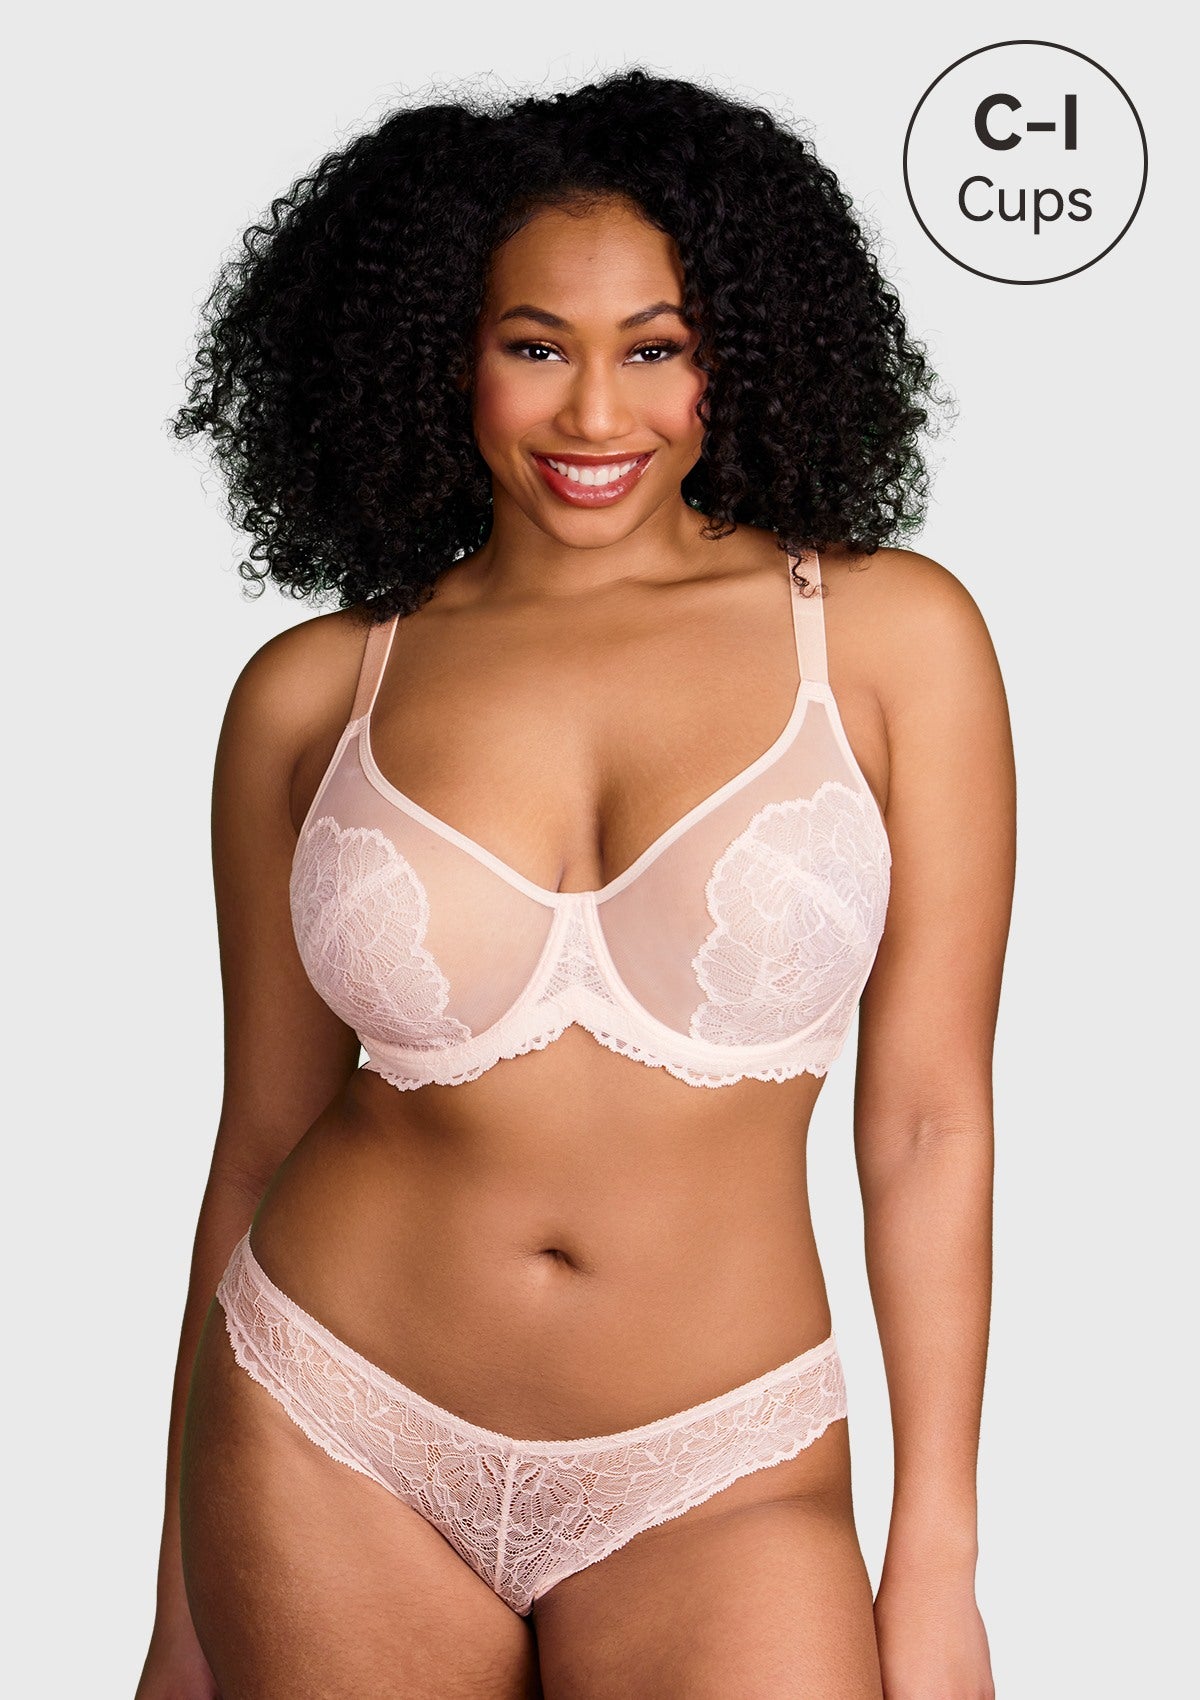 HSIA Blossom Sheer Lace Bra: Comfortable Underwire Bra For Big Busts - Dusty Peach / 40 / C